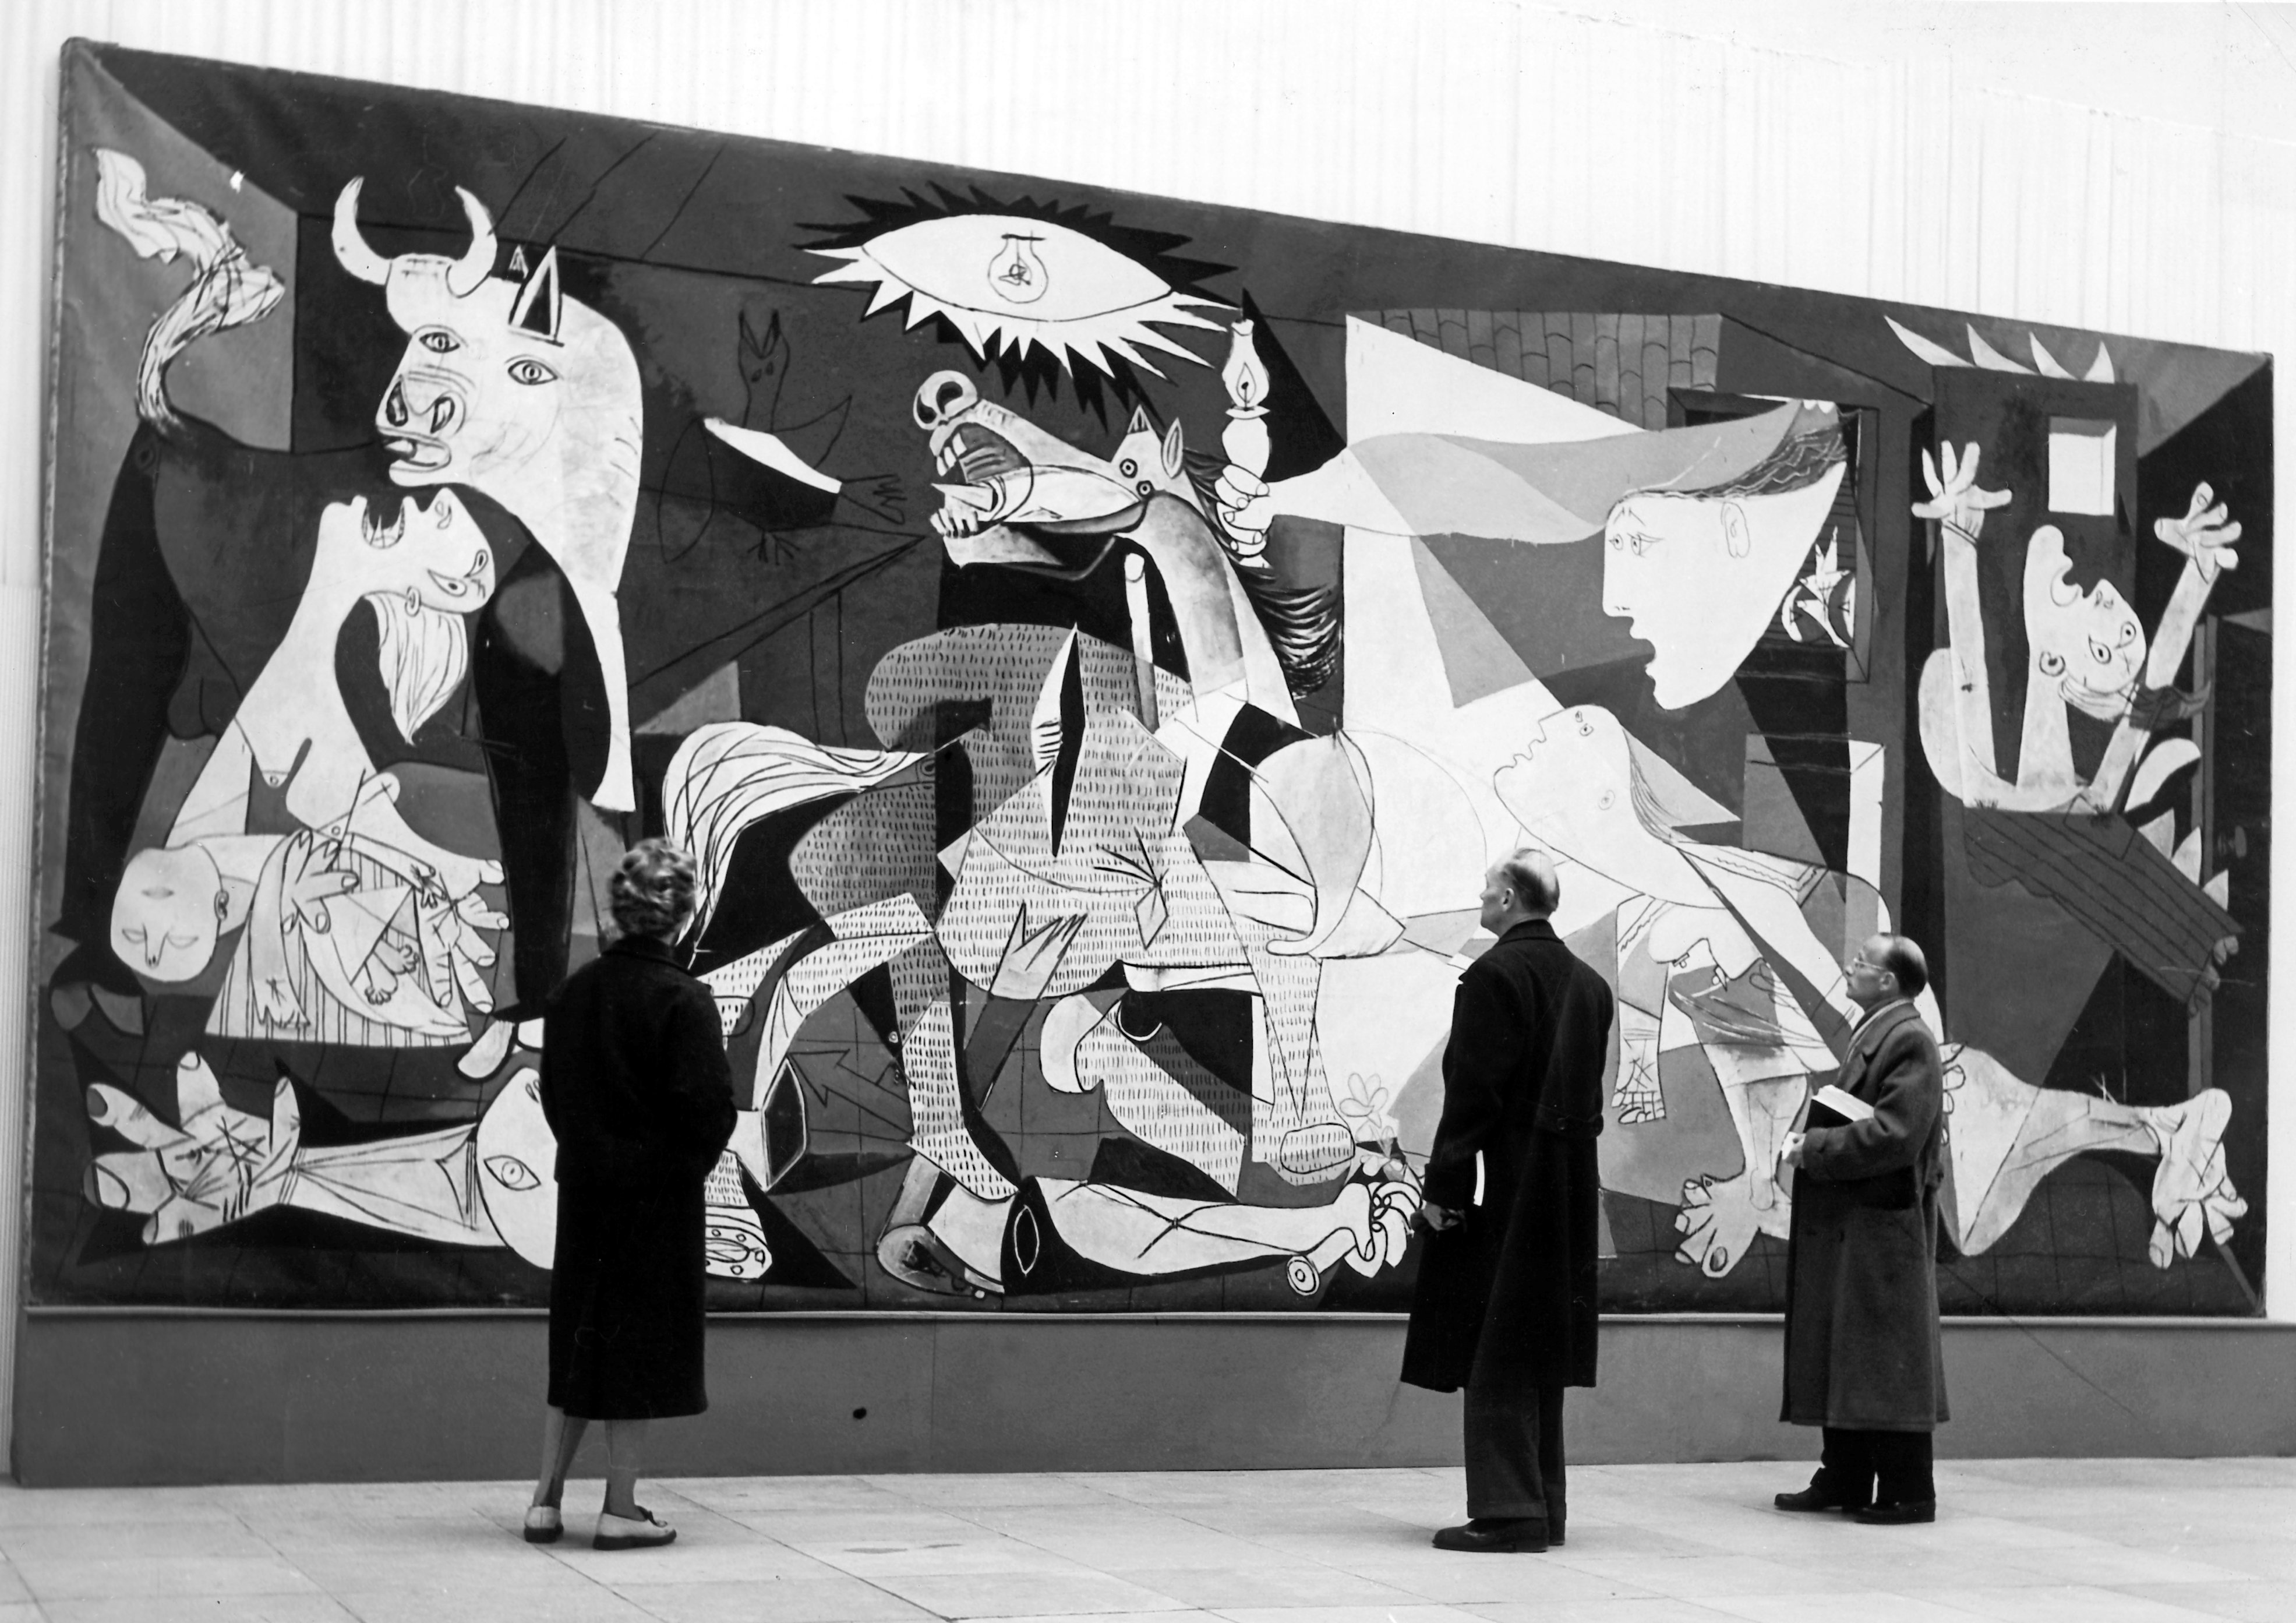 Visitors to the Picasso exhibition in Munich, Germany, in October 1955 look at the famous painting 'La Guernica' by Pablo Picasso. (Georg Goebel—Picture Alliance/Getty Images)